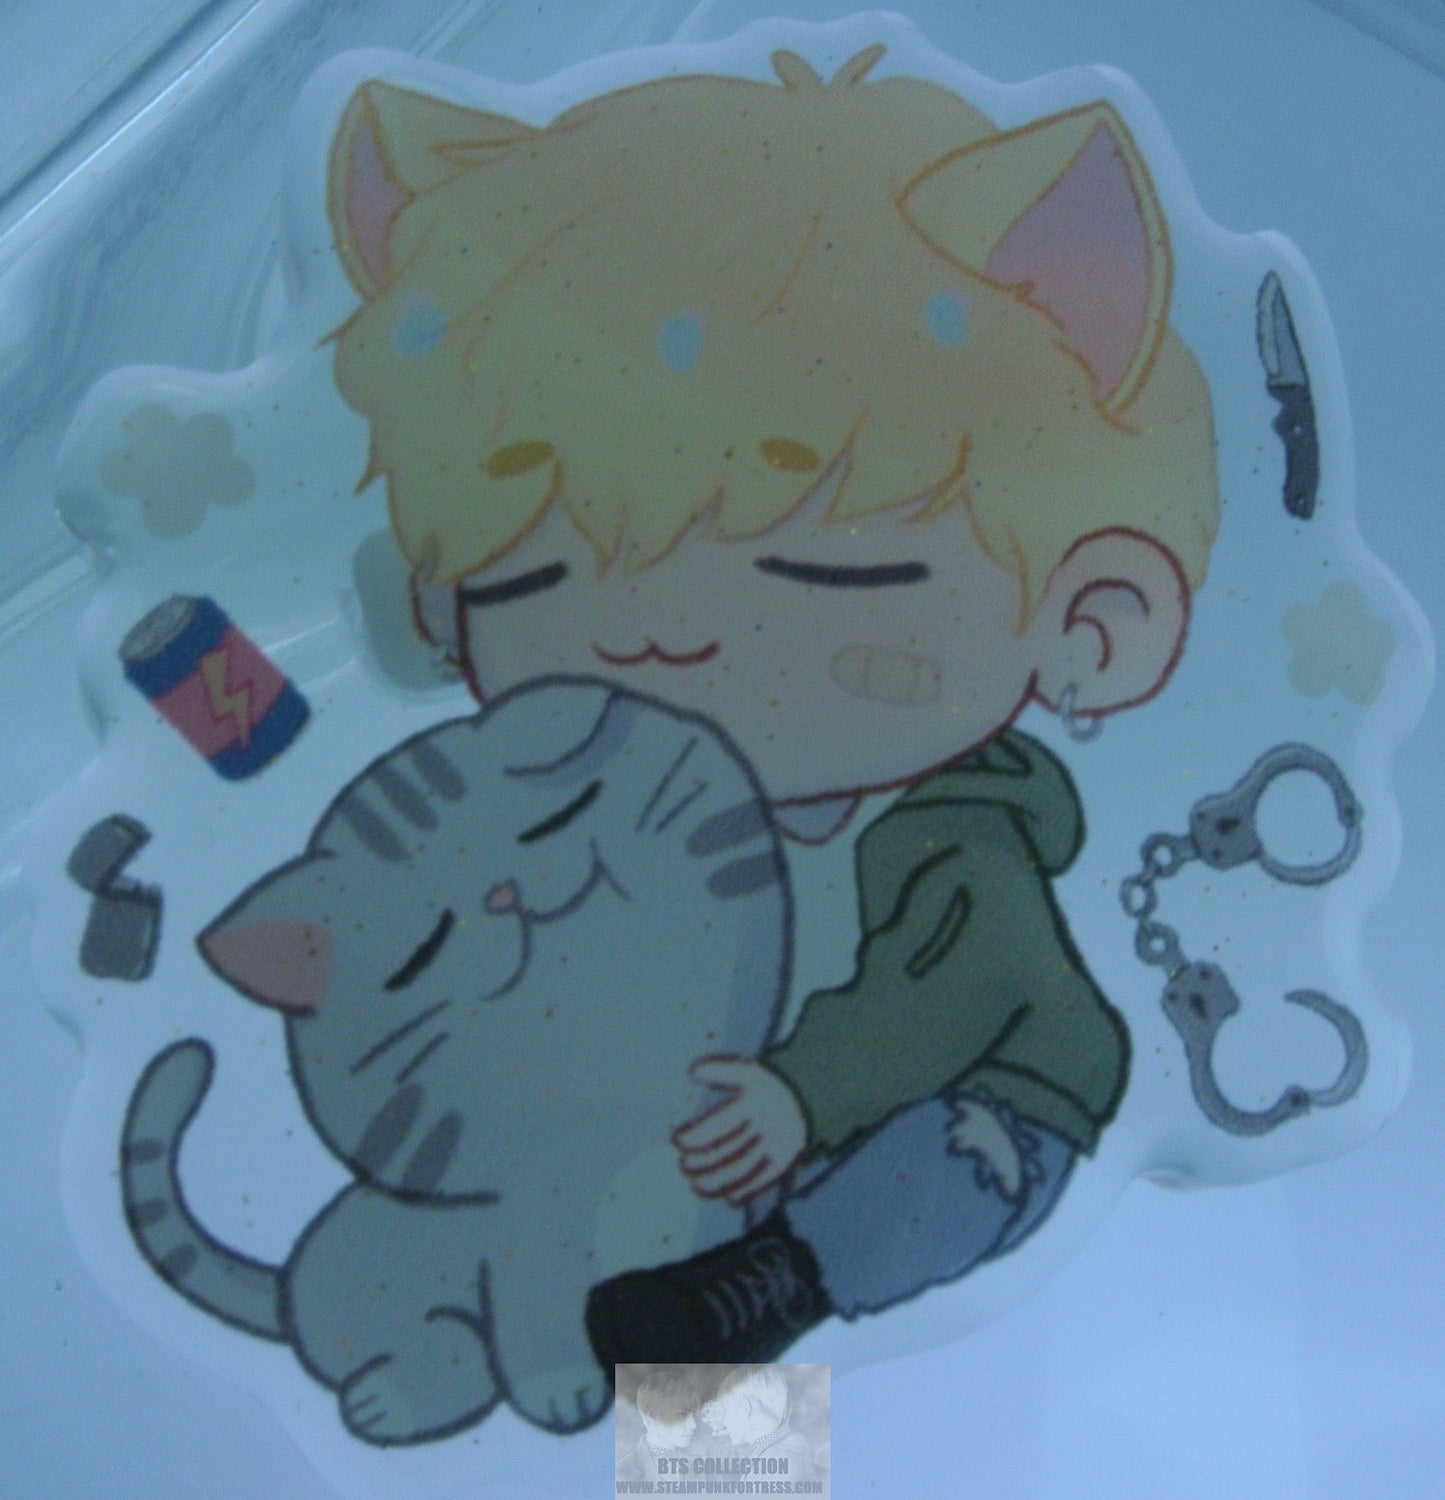 BTS ACRYLIC PIN PARK JIMIN CLEAR PLAYING WITH CAT WITH CAT EARS BADGE BUTTON